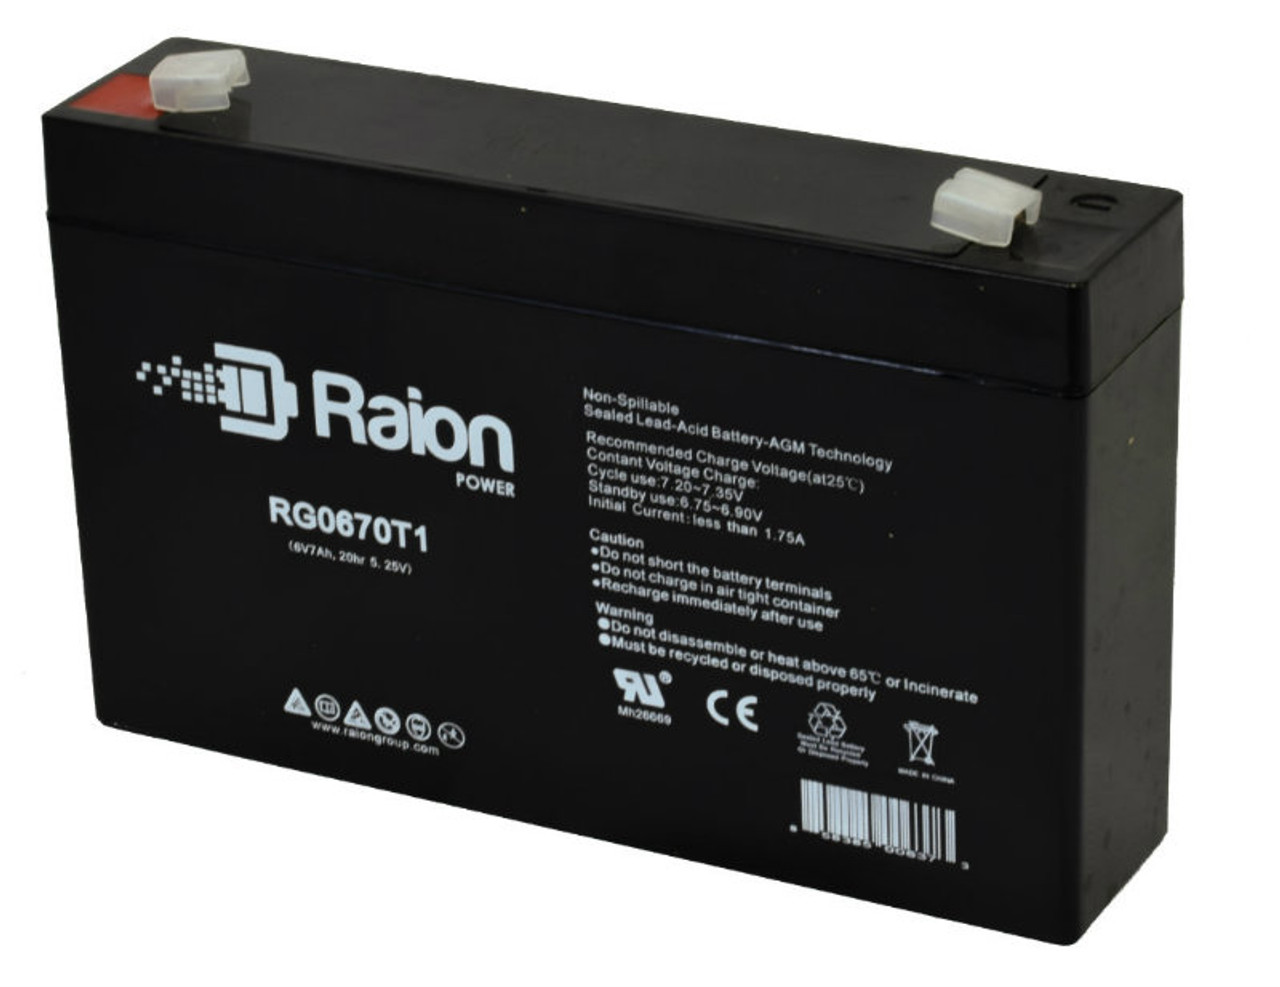 Raion Power RG0670T1 Replacement Battery for Yuasa NP7-6 OEM Battery